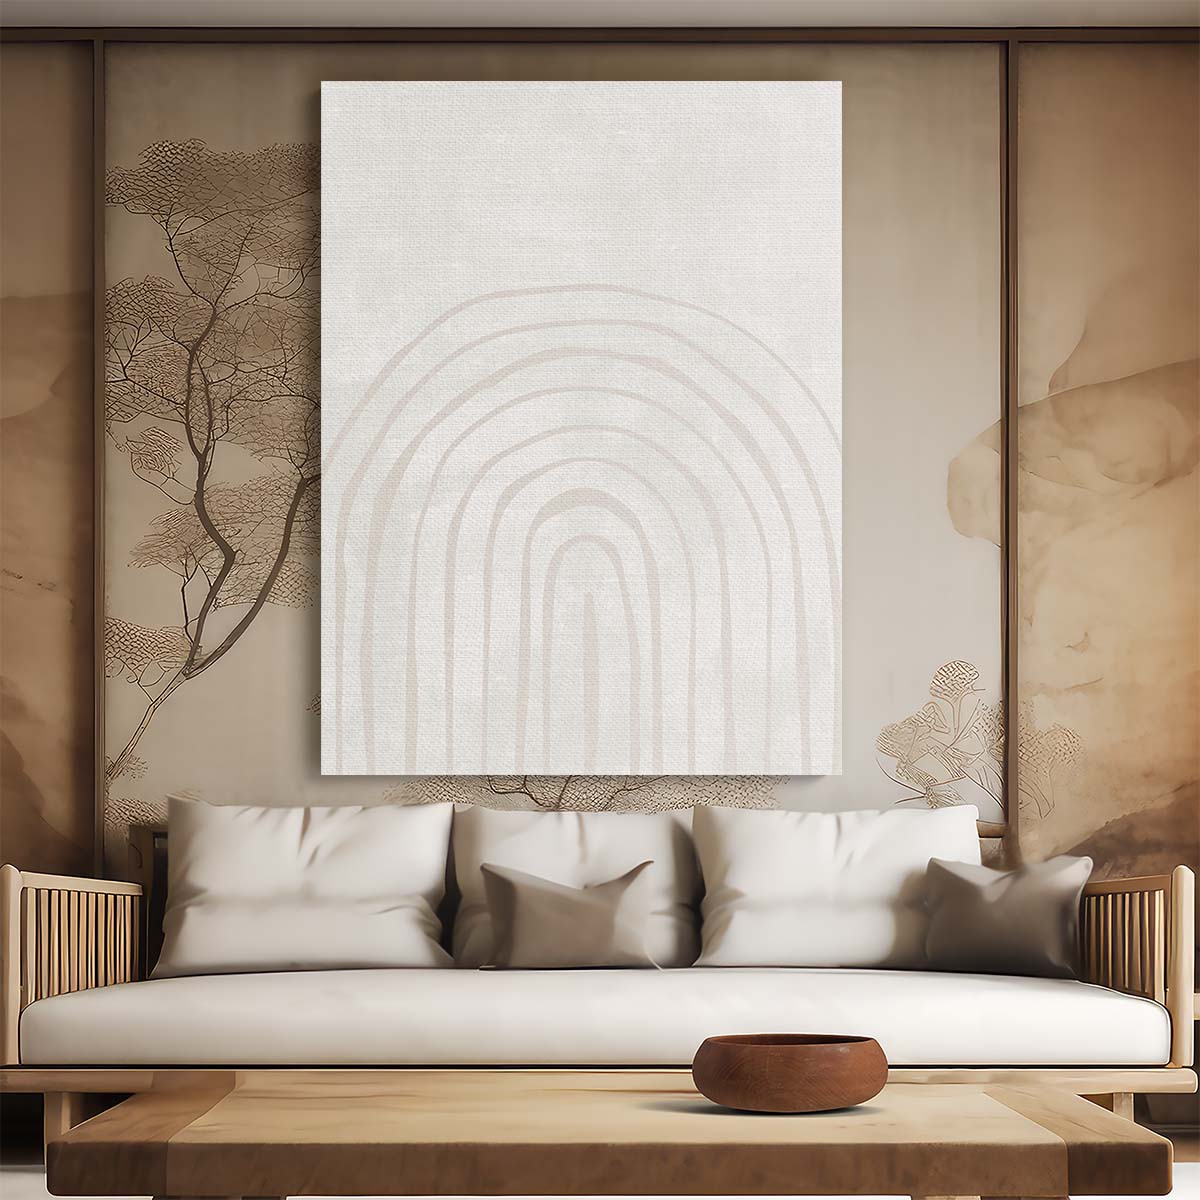 Abstract Beige Arch Geometry Illustration - Symmetrical Graphic Artwork by Luxuriance Designs, made in USA